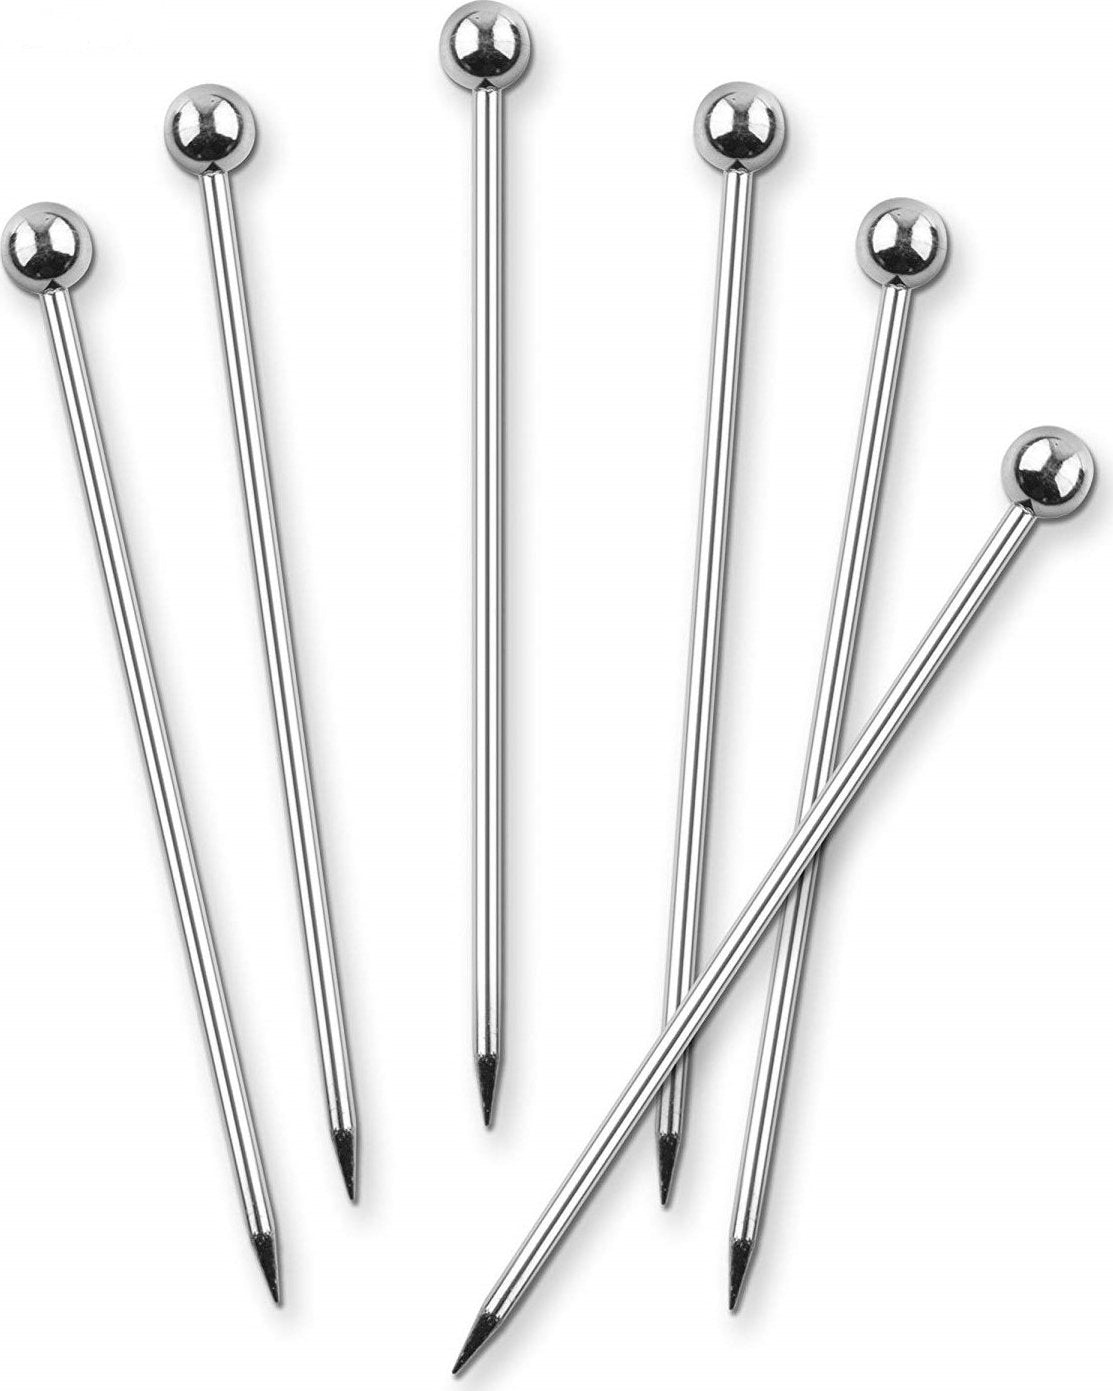 Final Touch - Stainless Steel Cocktail Picks Set of 6 - FTA7307